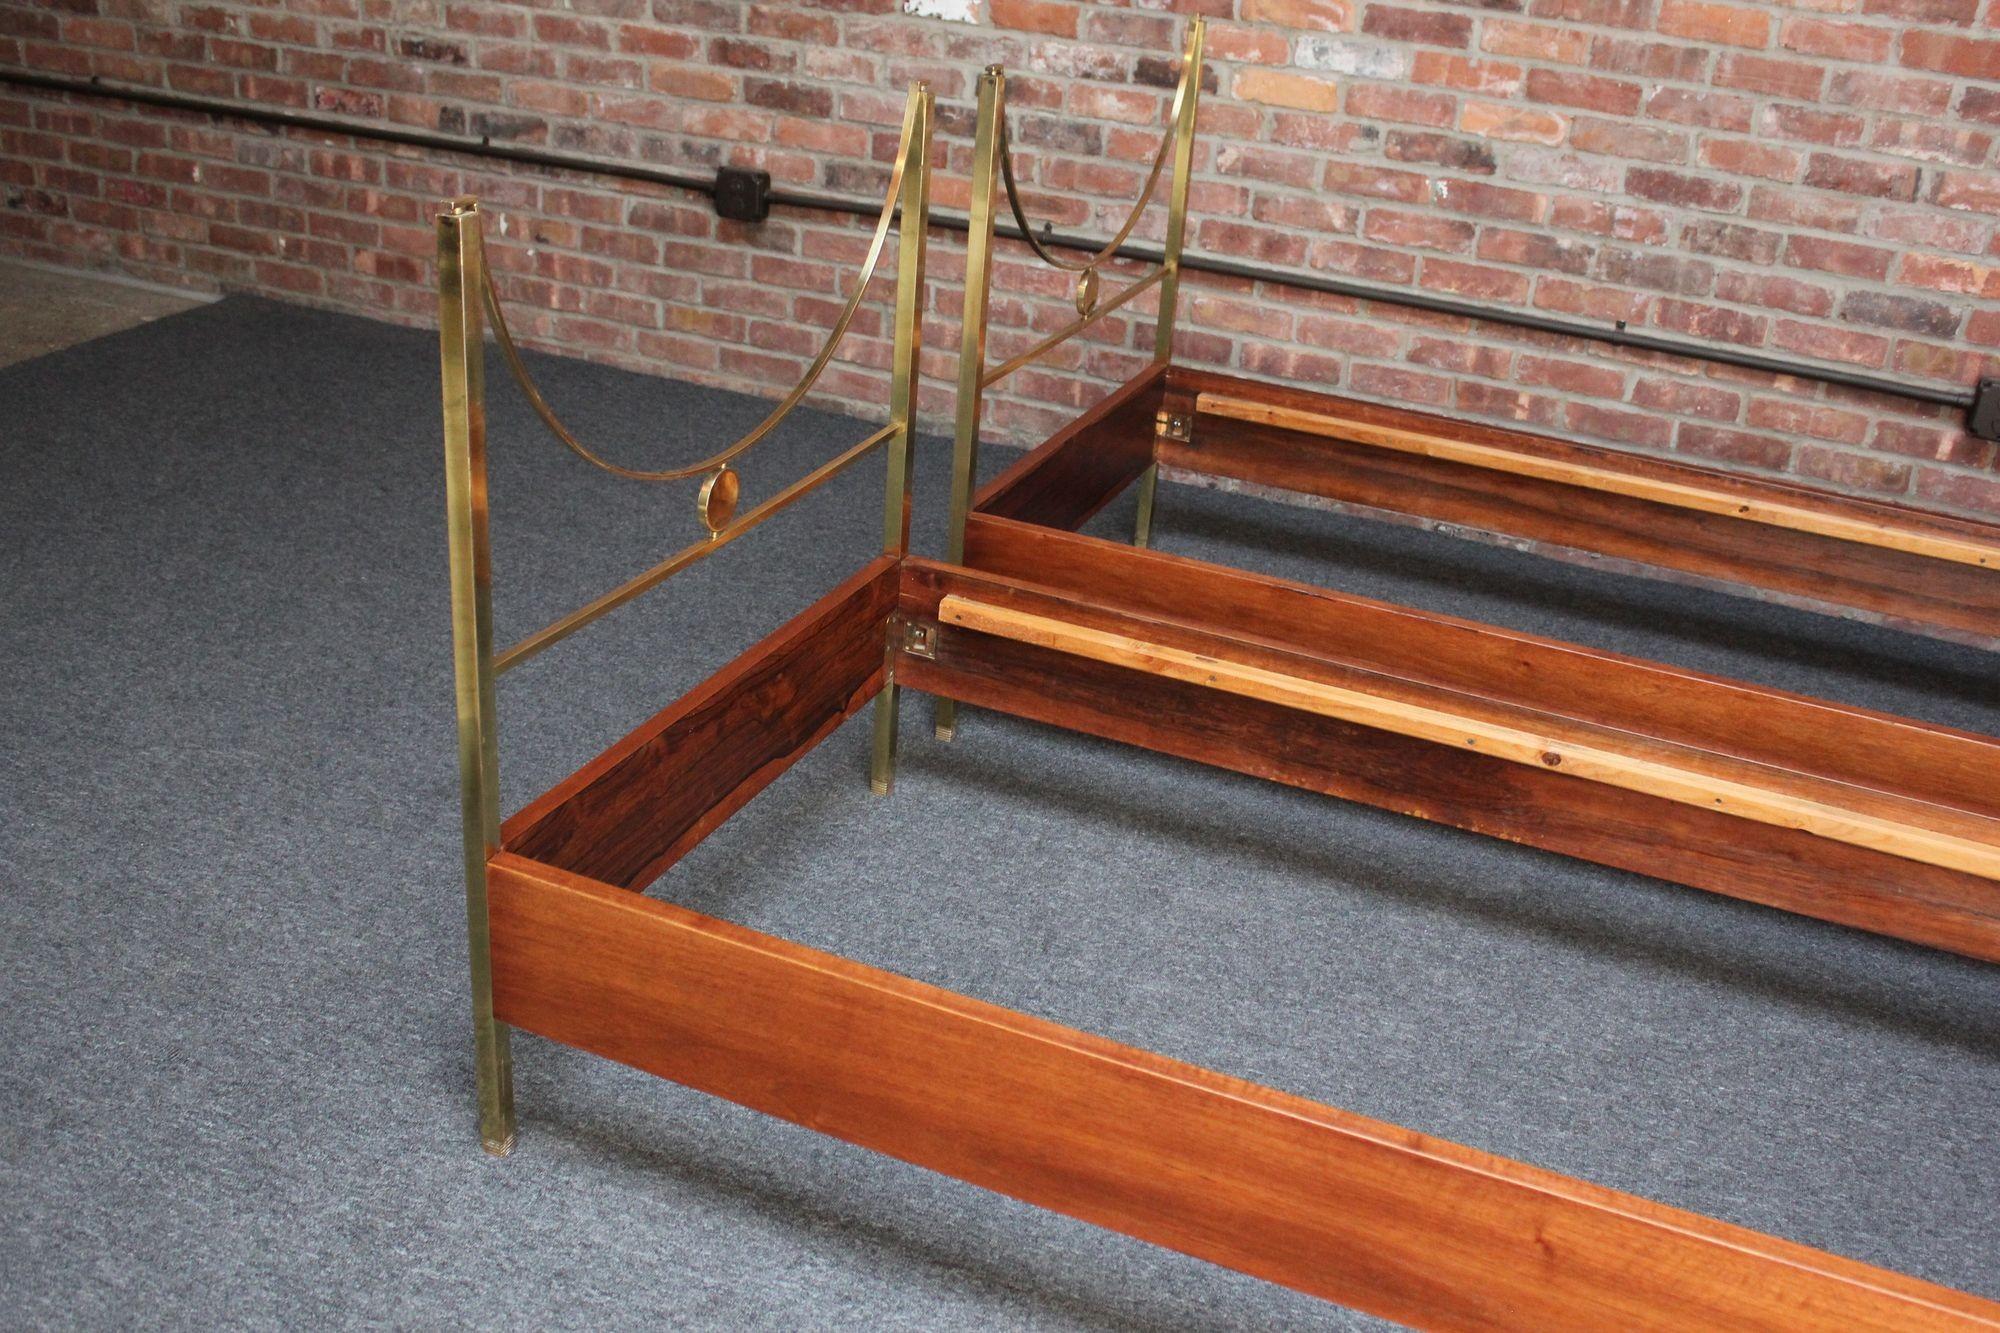 Pair of Vintage Italian Mahogany and Brass Beds by Carlo de Carli for Sormani For Sale 14